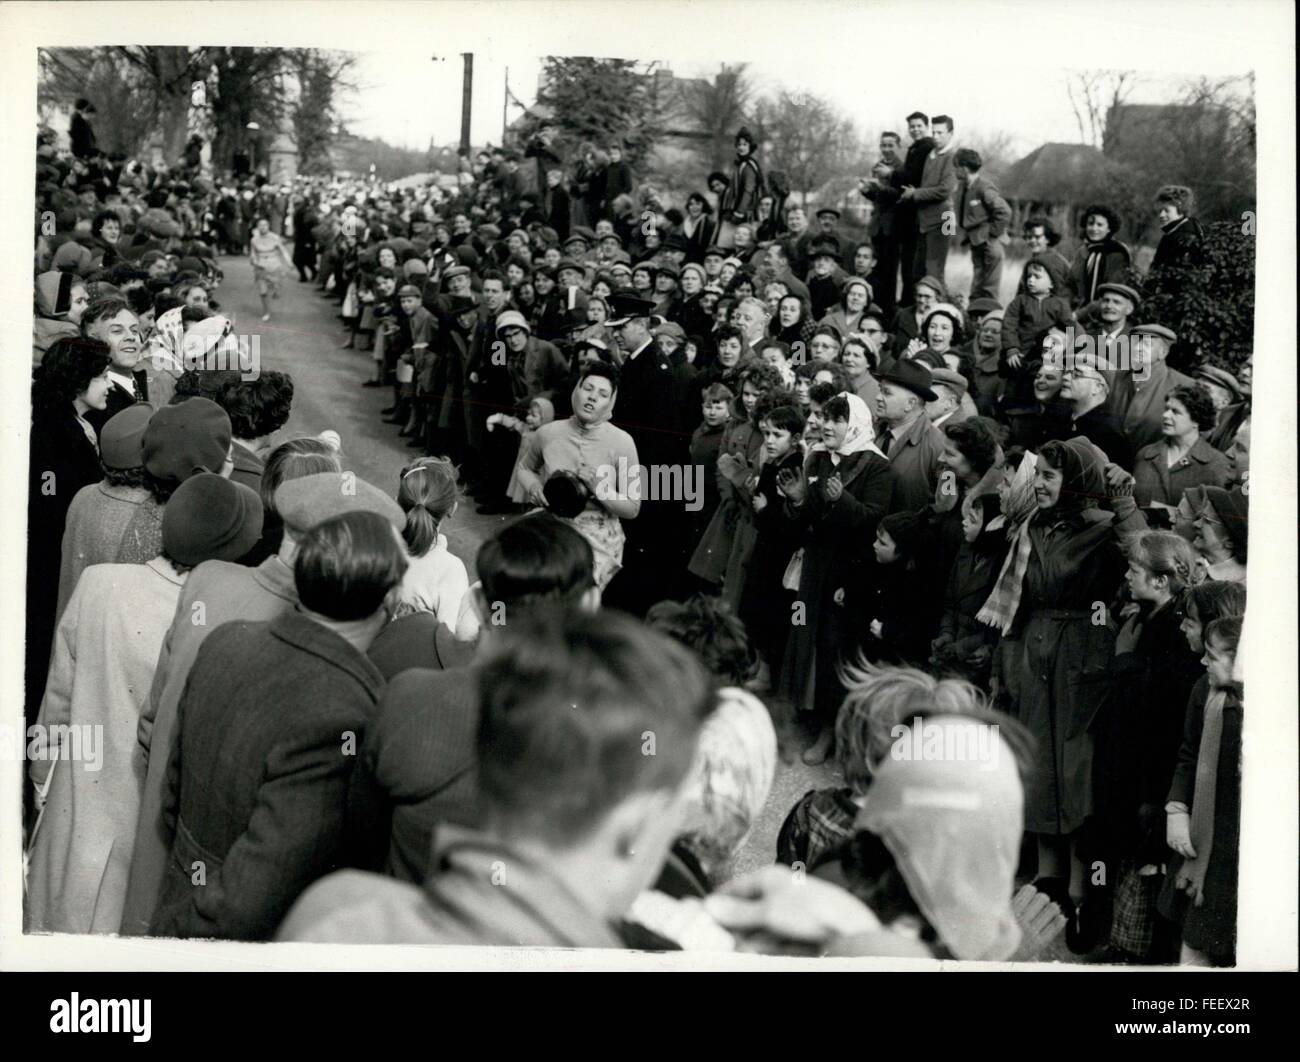 1960 - Annual Pancake race at Olney - Bucks: Winner runs through the crown. The annual Pancake Day Race was held today at Olney, Bucks. They competed with a team - running at Liberal Kansas. Today's event at Olney was won by Carol Varley. Photo Shows Carol Varley is applauded by the onlookers as she races home - to win the 1960 Pancake Race at Onley - Bucks, today. © Keystone Pictures USA/ZUMAPRESS.com/Alamy Live News Stock Photo